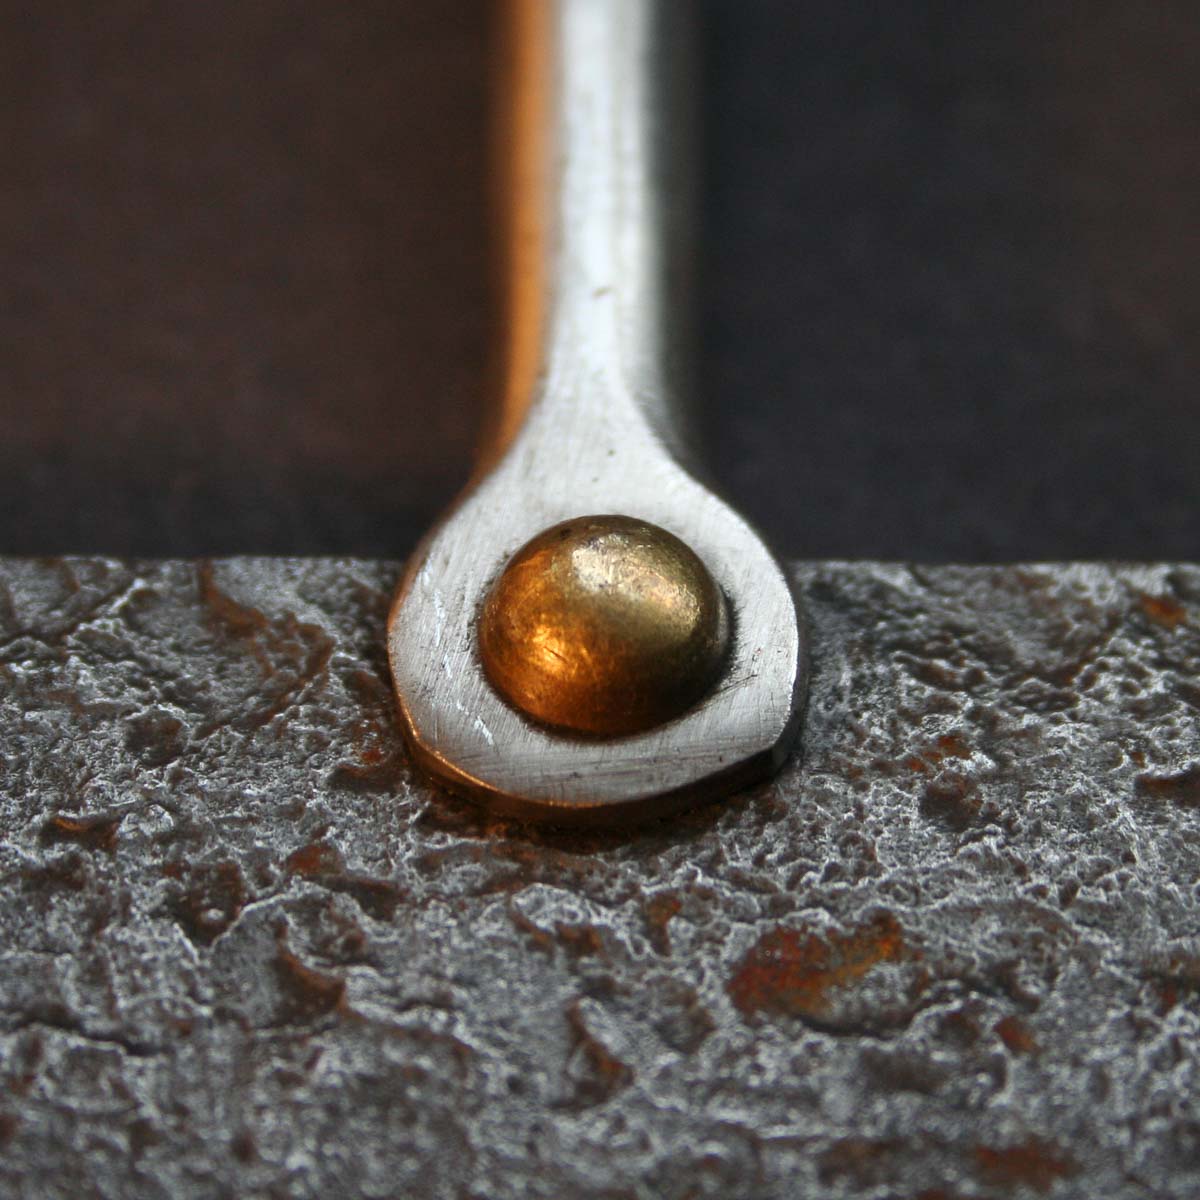 Forged and textured steel, stainless steel and a brass rivet